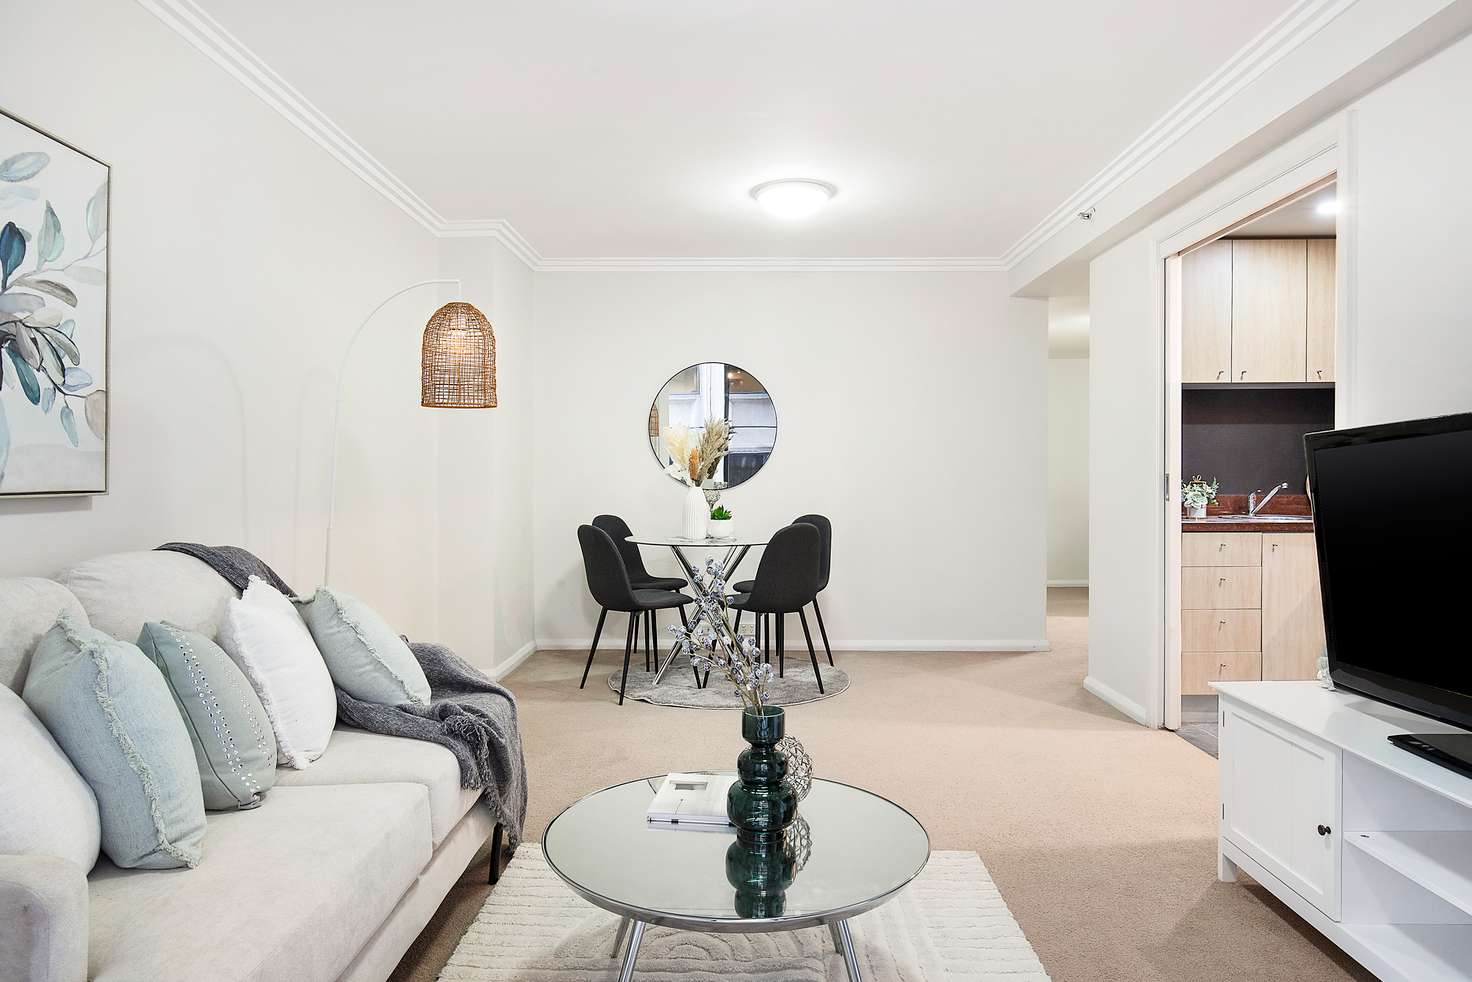 Main view of Homely apartment listing, 620/1 Sergeants Lane, St Leonards NSW 2065